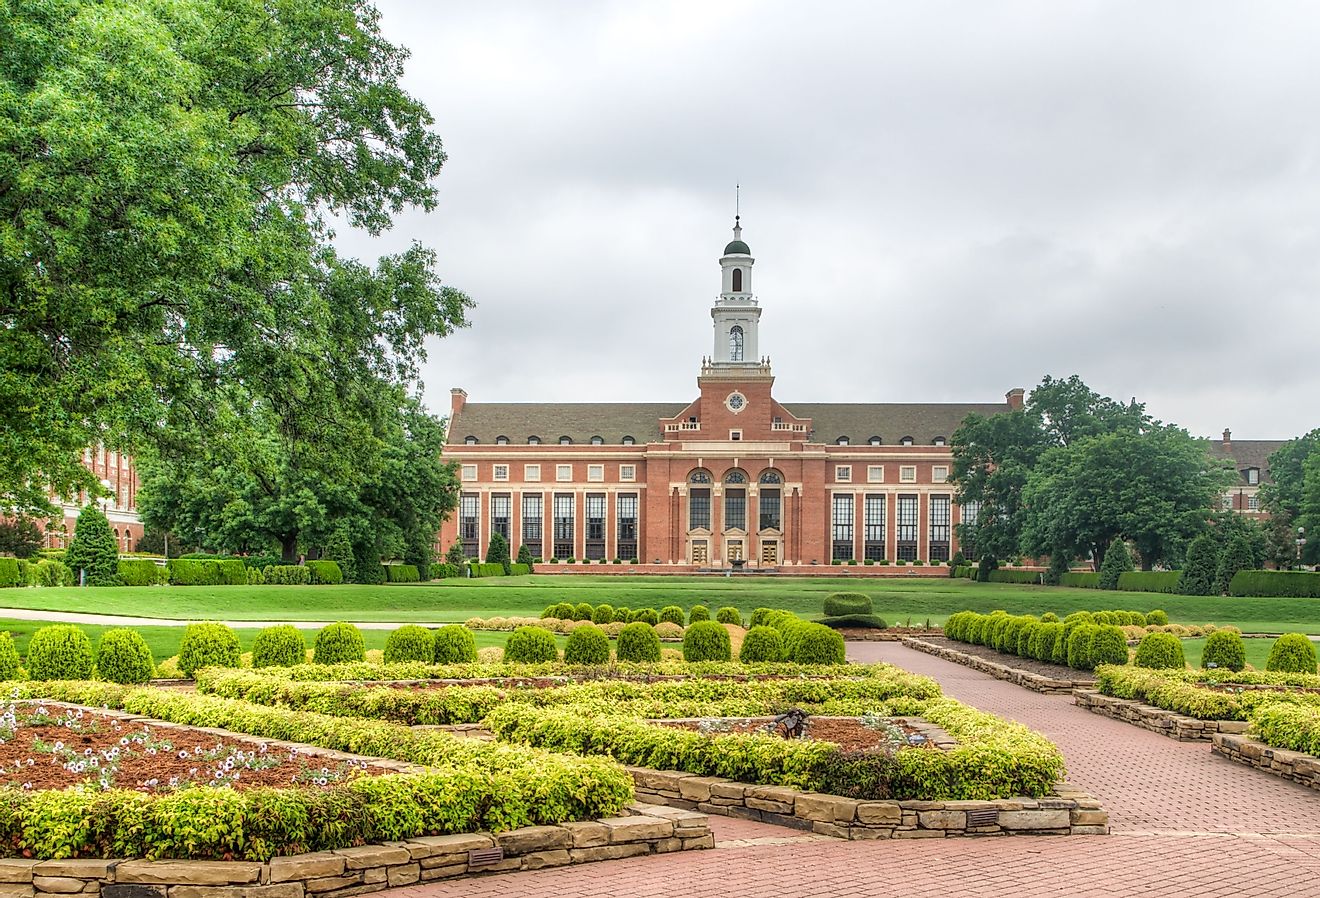 Edmon Low Library on the campus of Oklahoma State University in Stillwater. Image credit Ken Wolter via Shutterstock.